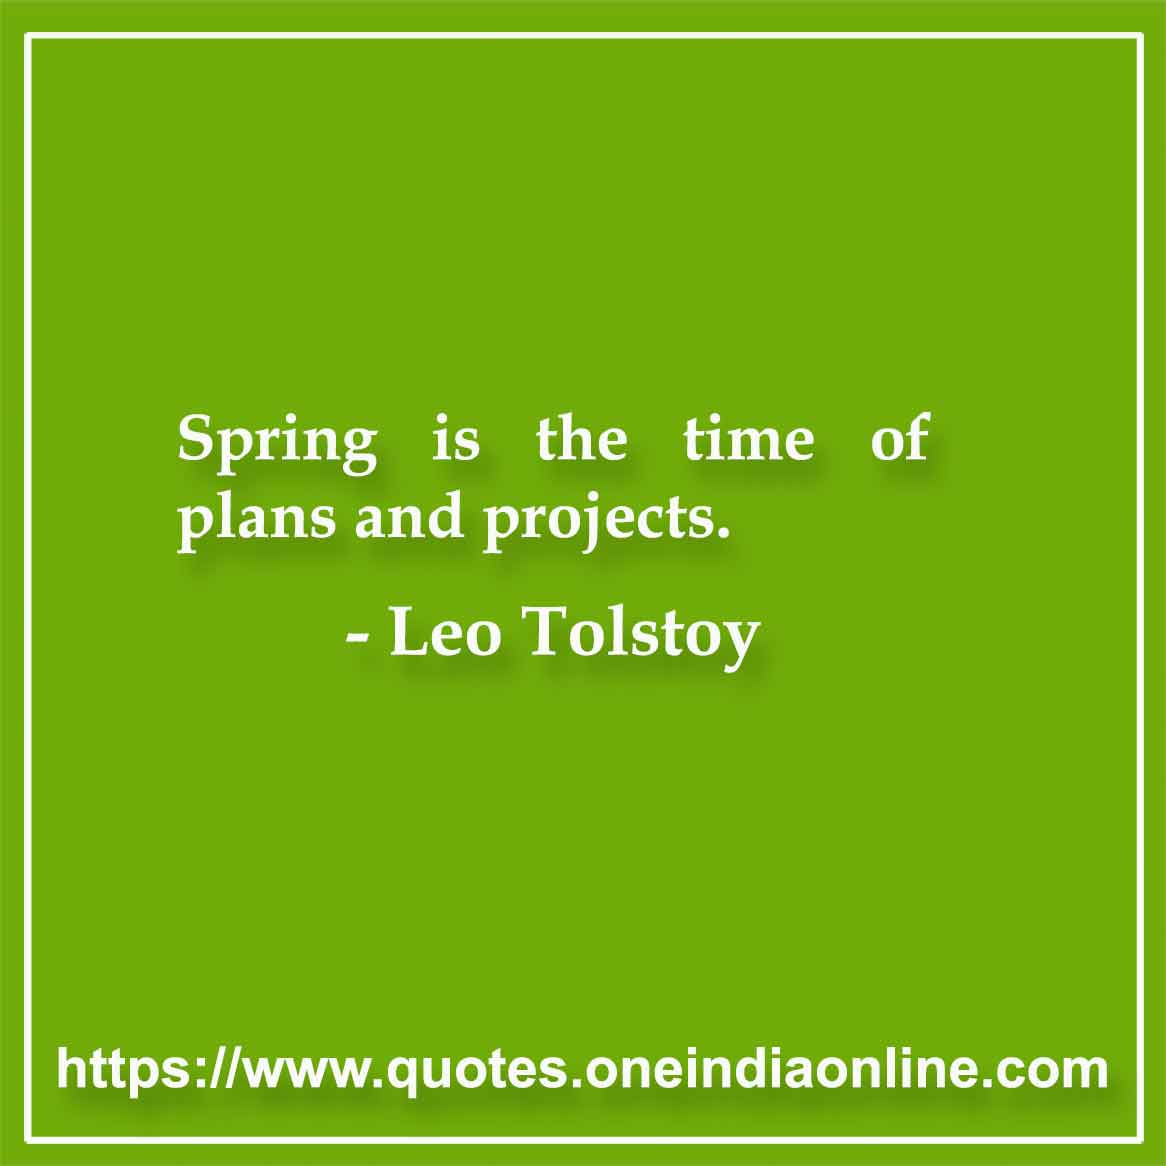 Spring is the time of plans and projects.

- Leo Tolstoy